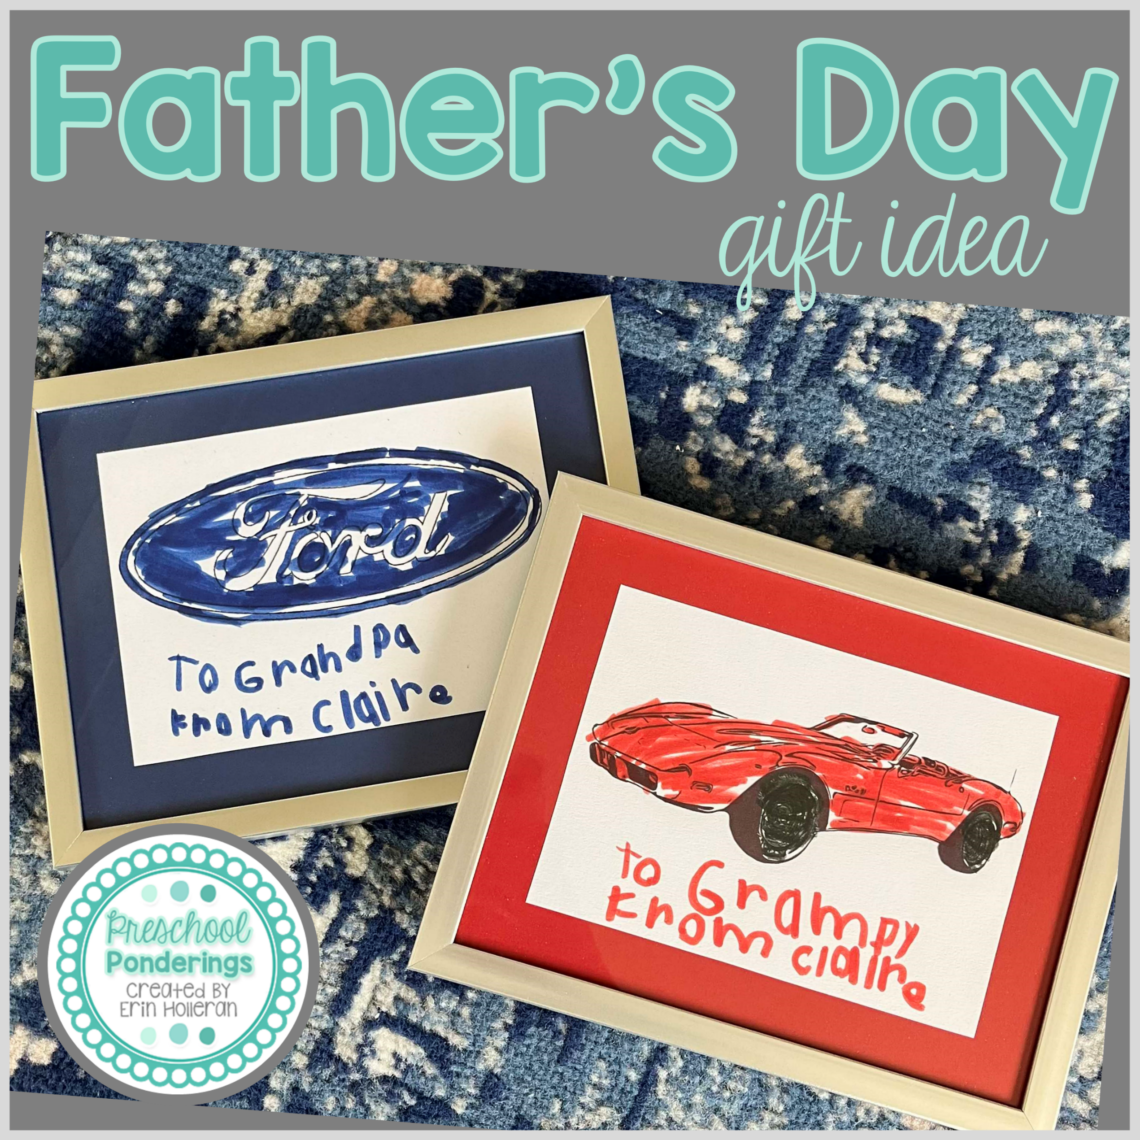 Father's Day gift idea from kids